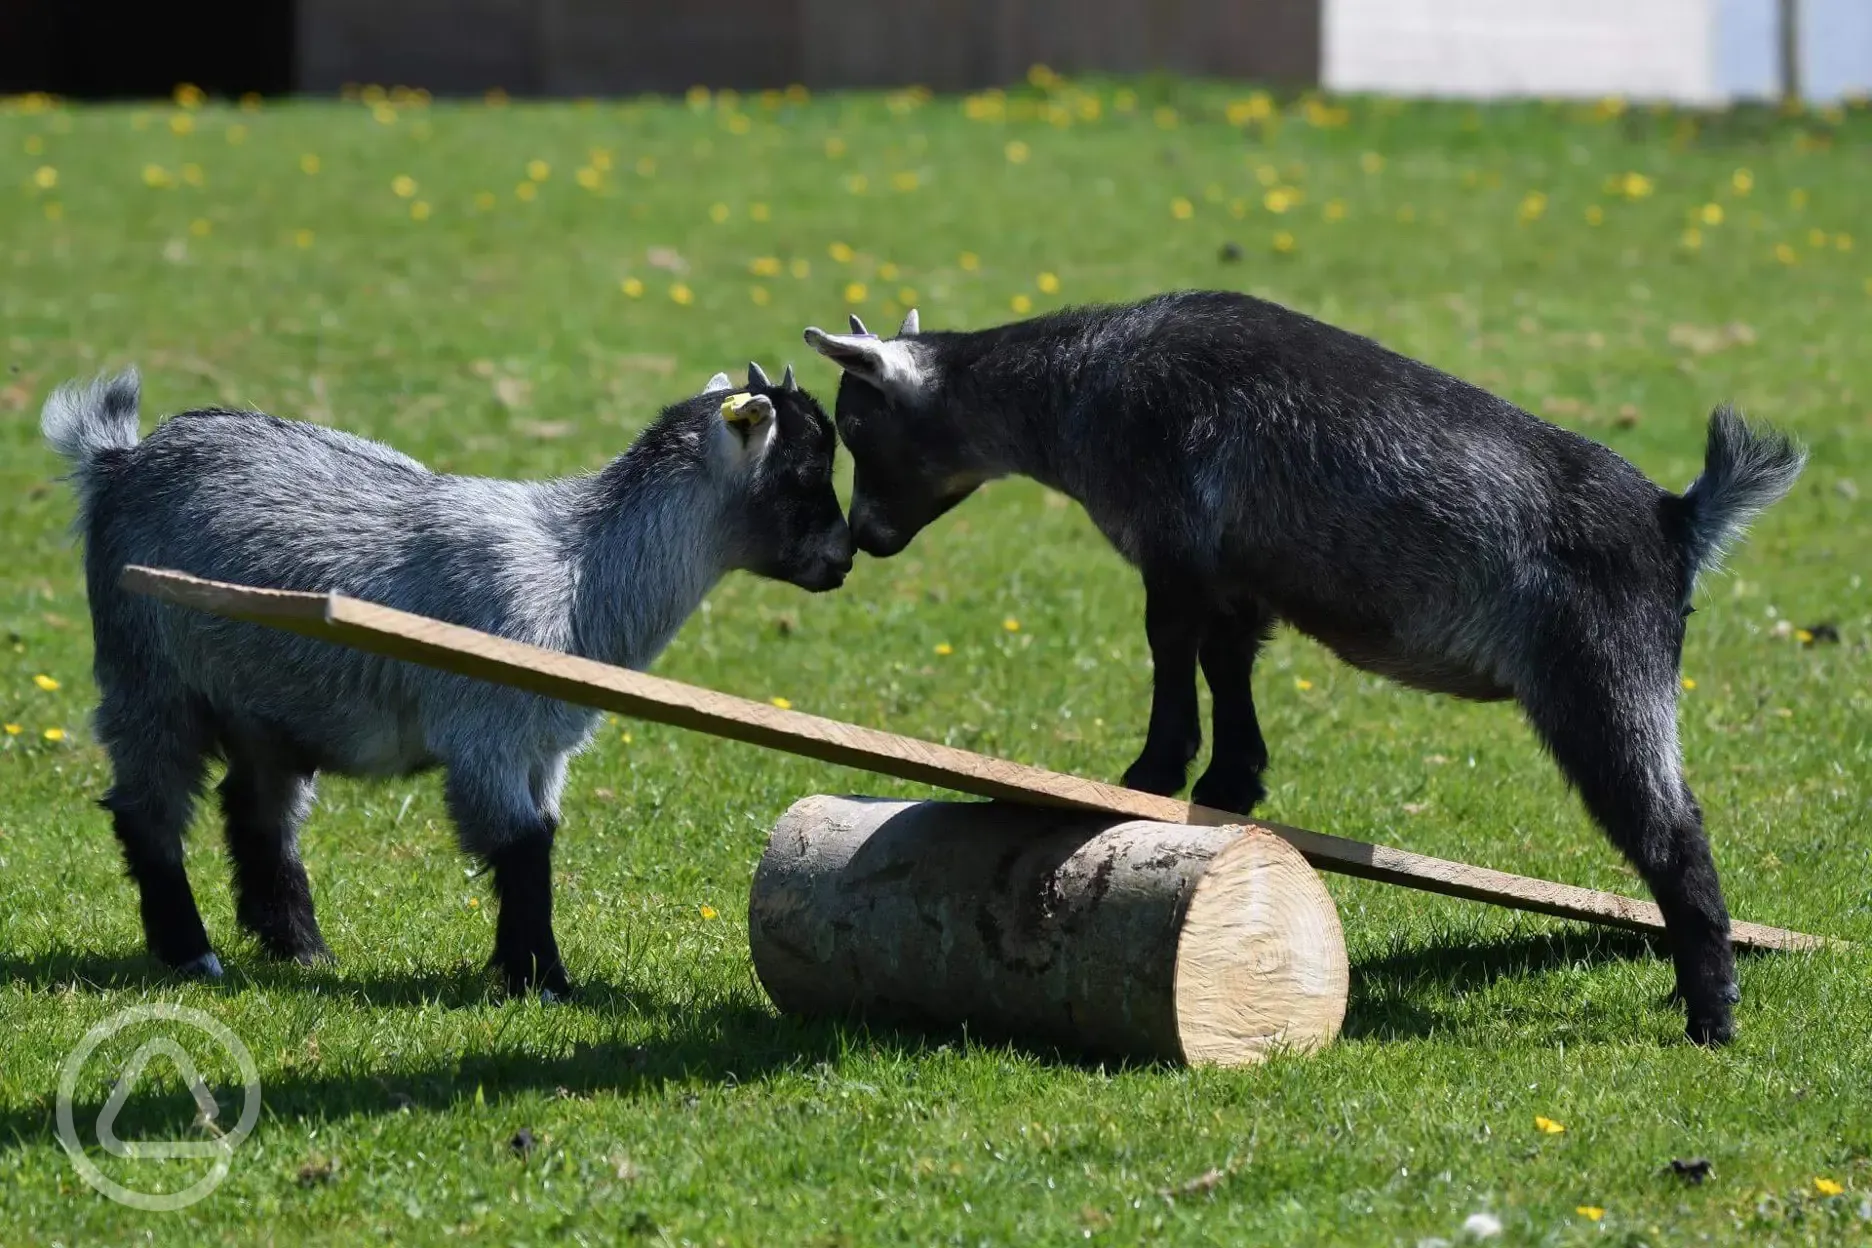 Orchid and Peony the new Pygmy goats